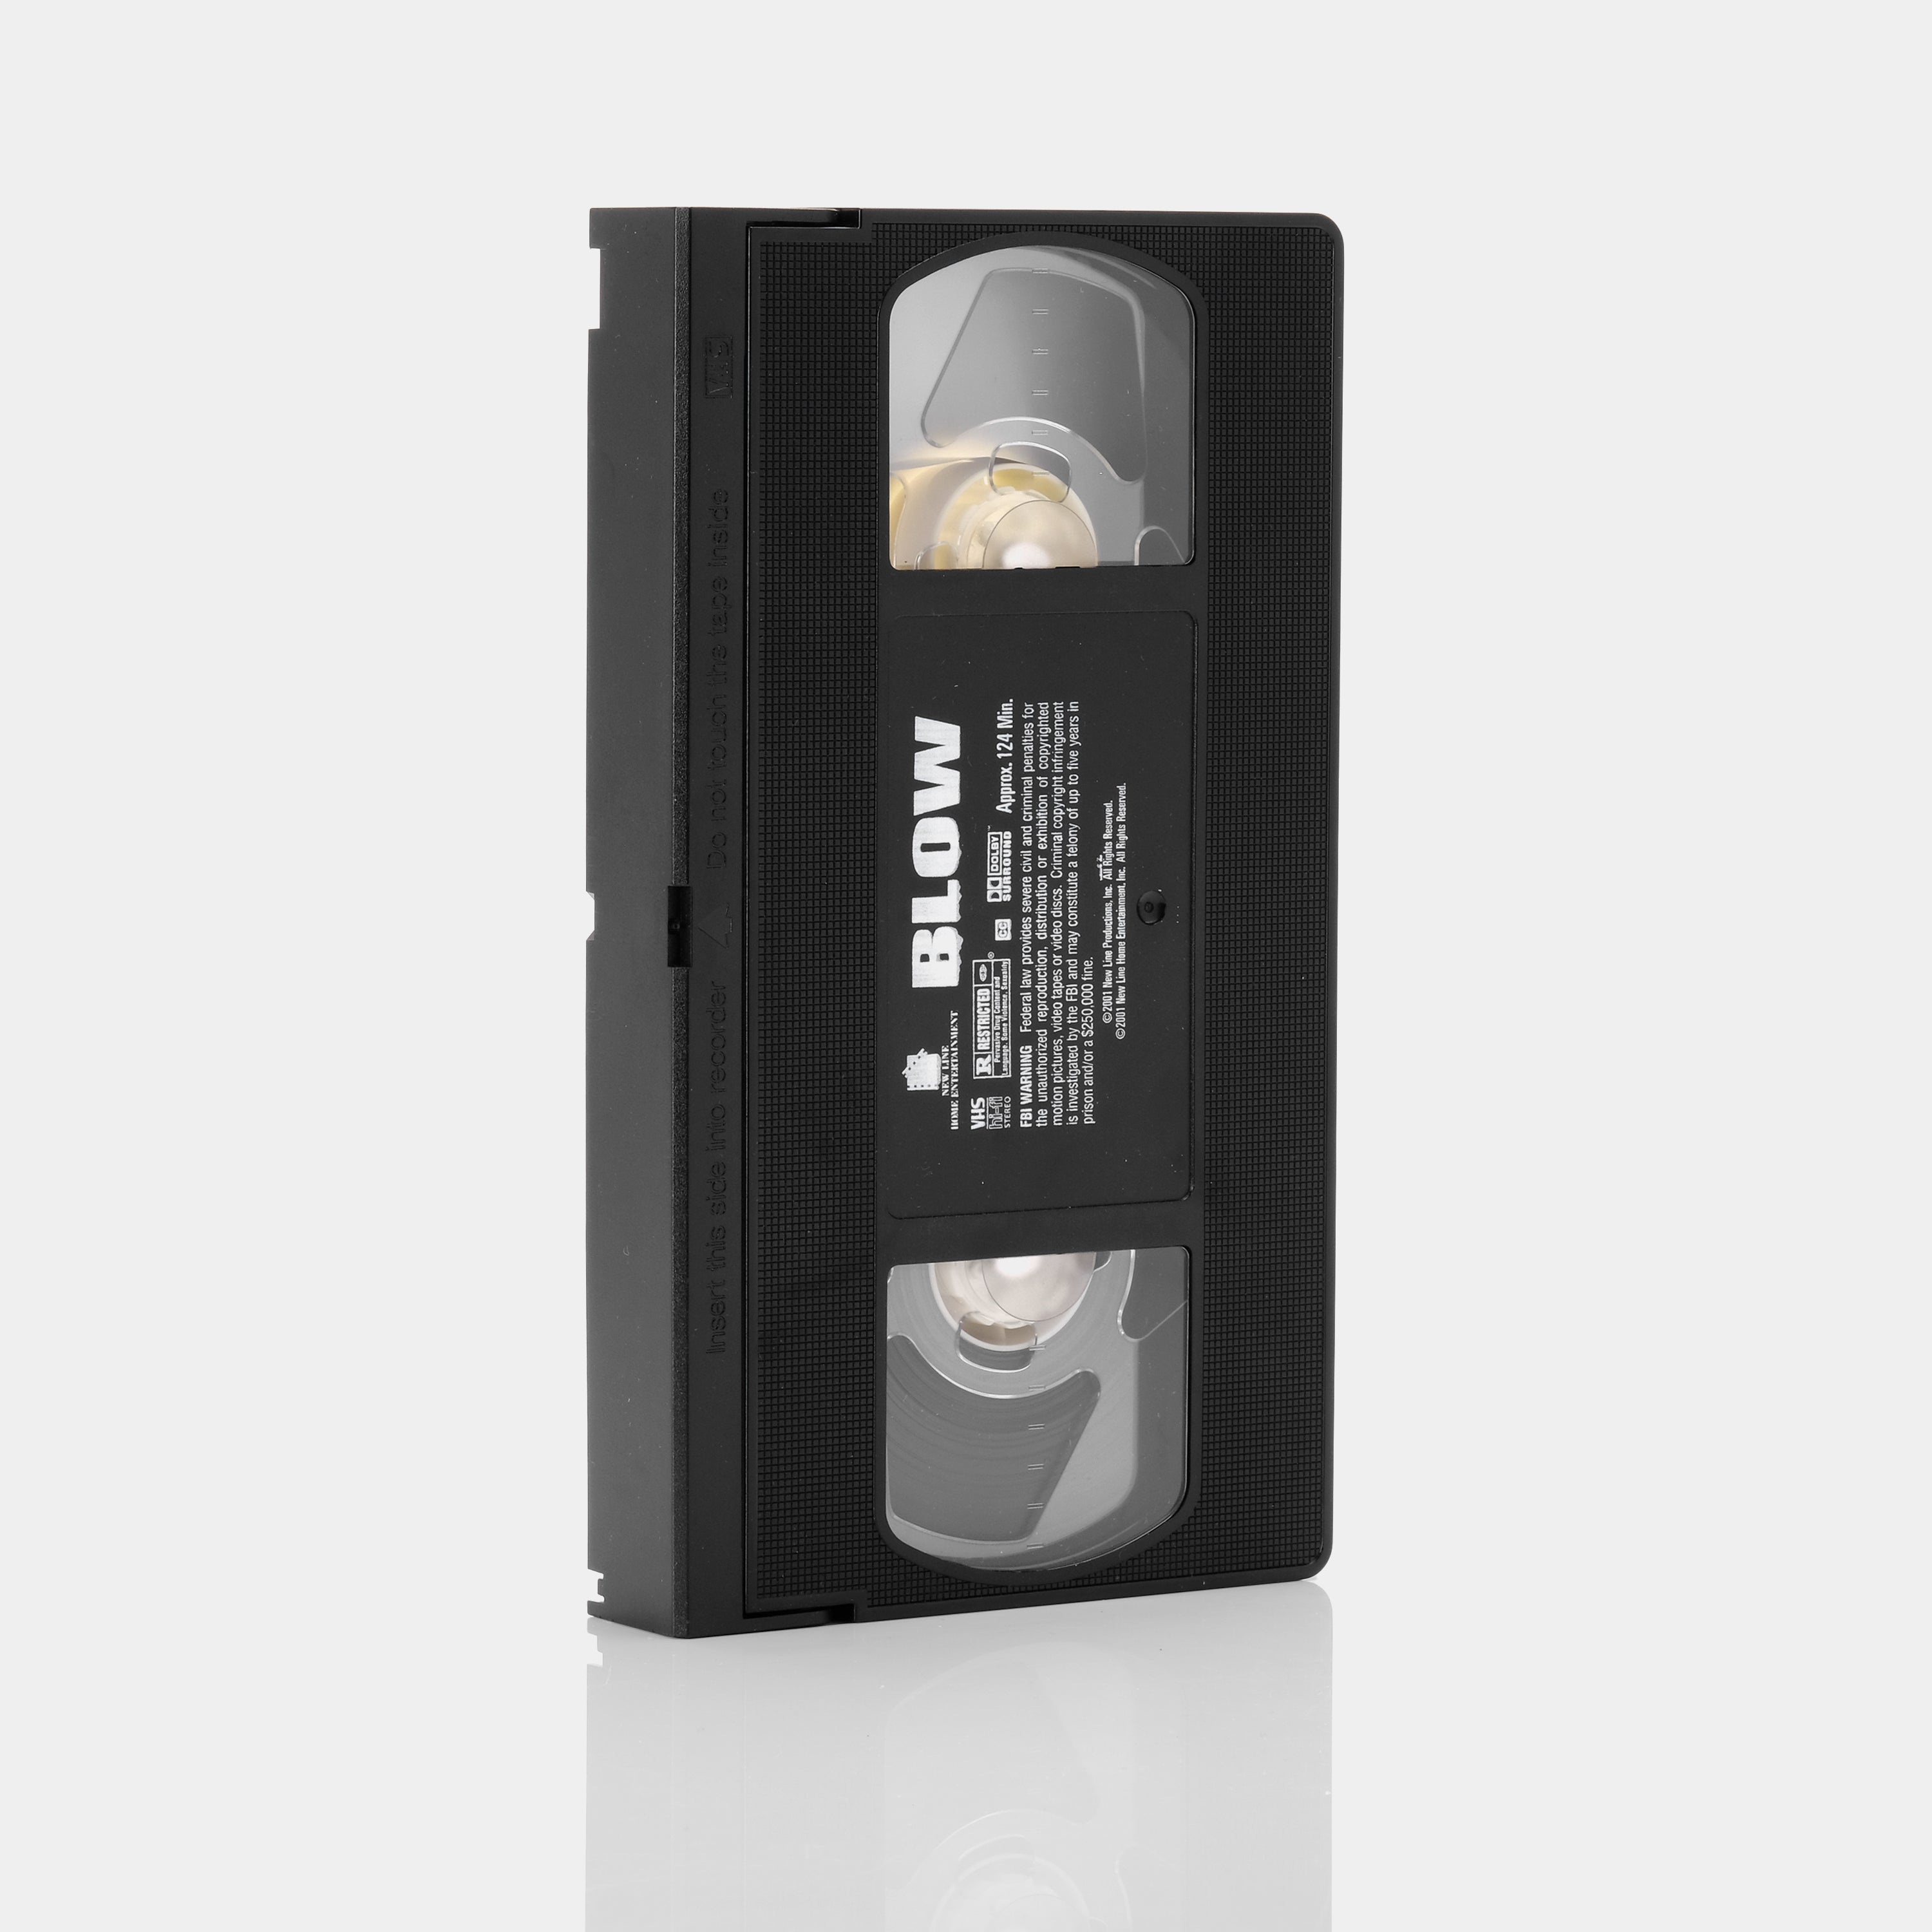 Blow VHS Tape